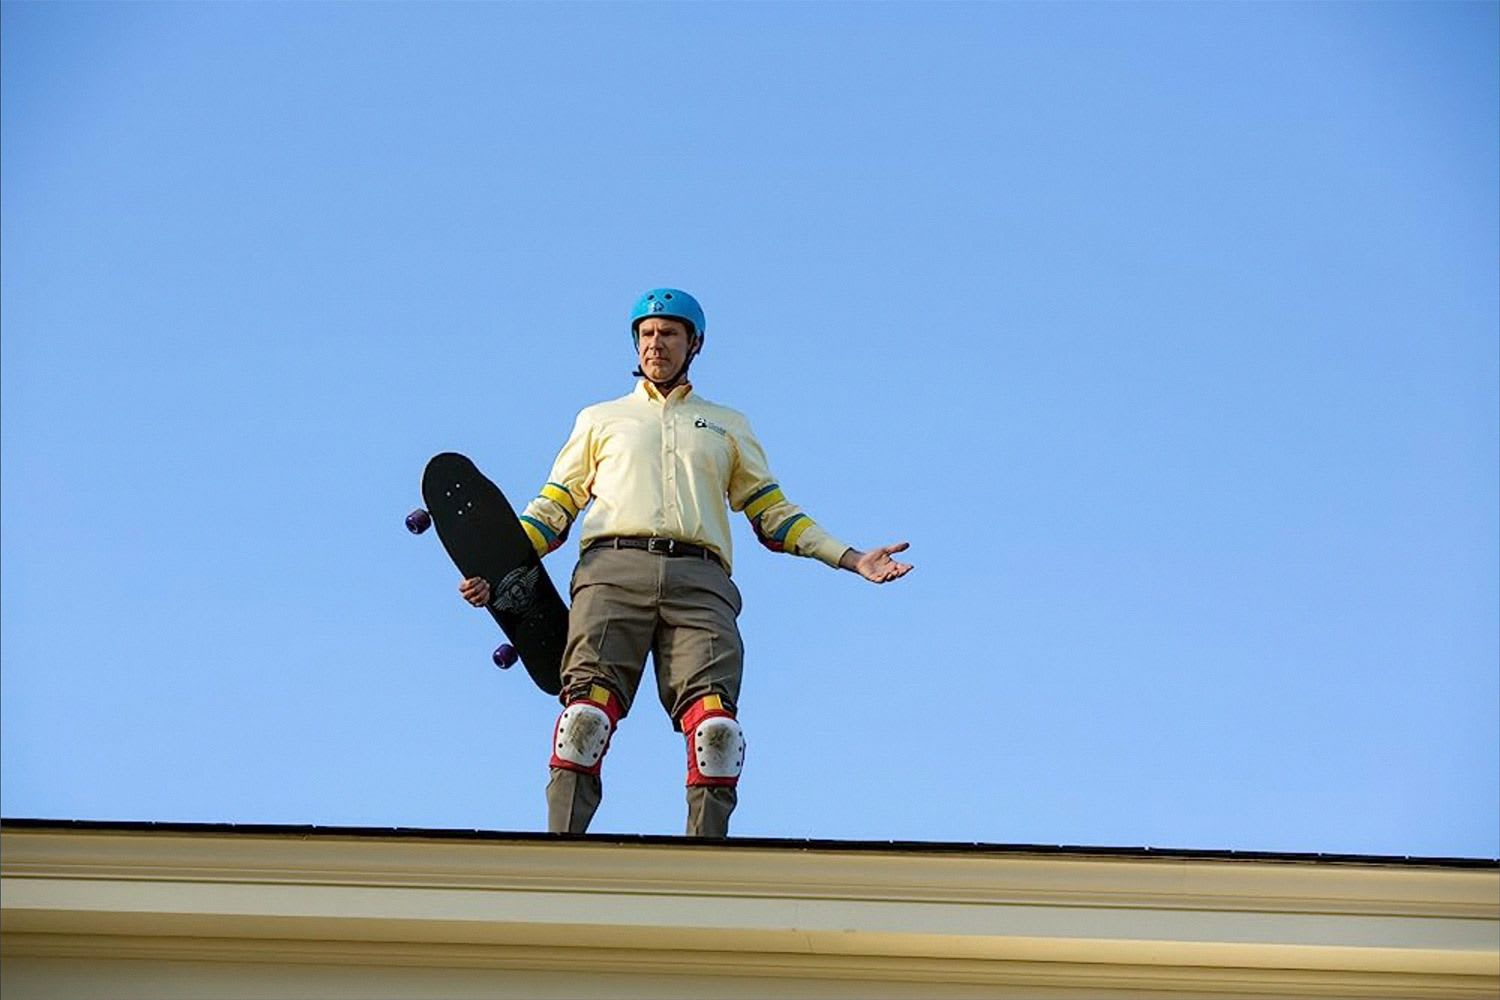 will ferrell on roof with skateboard